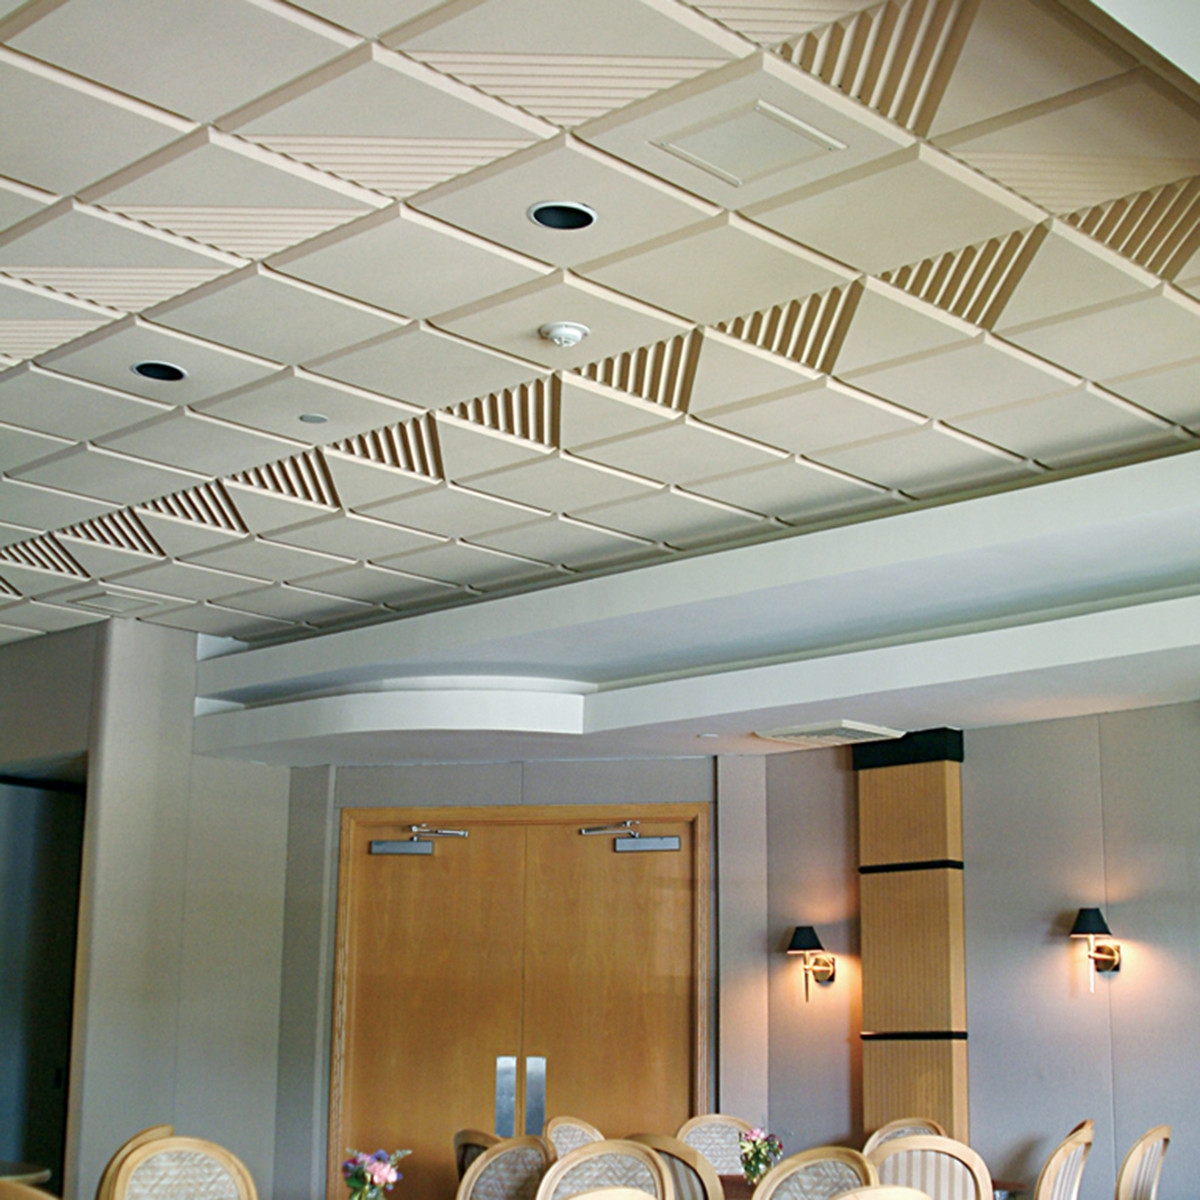 Permalink to Sound Absorbing Drop Ceiling Tiles